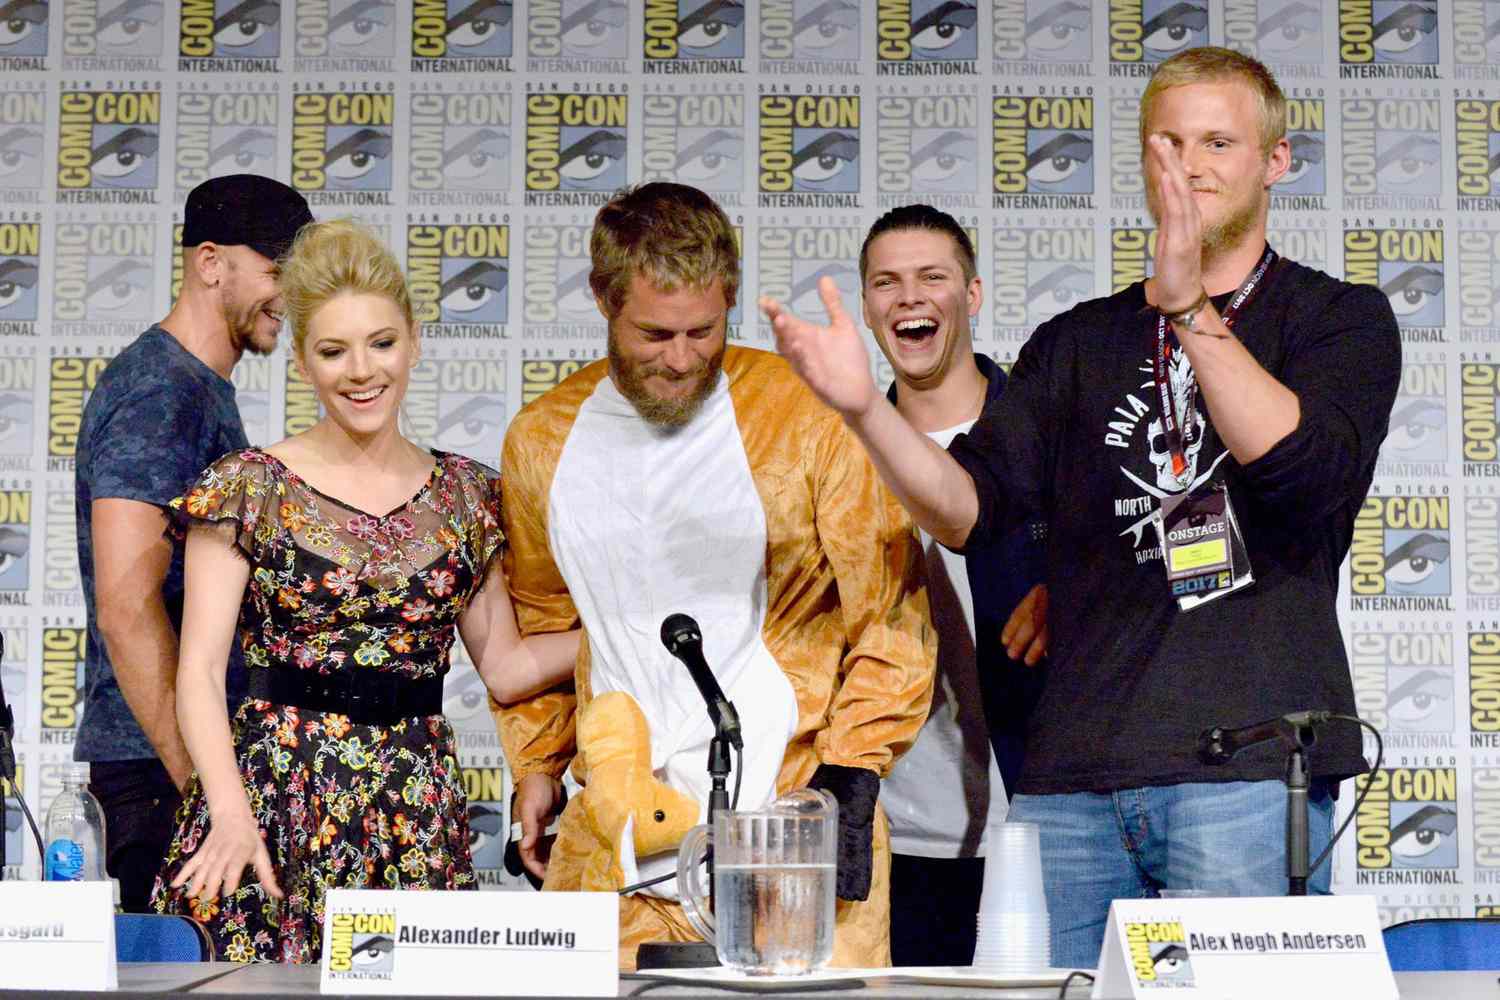 SDCC Panel With The Cast And Creator Of HISTORY's Drama Series "Vikings"